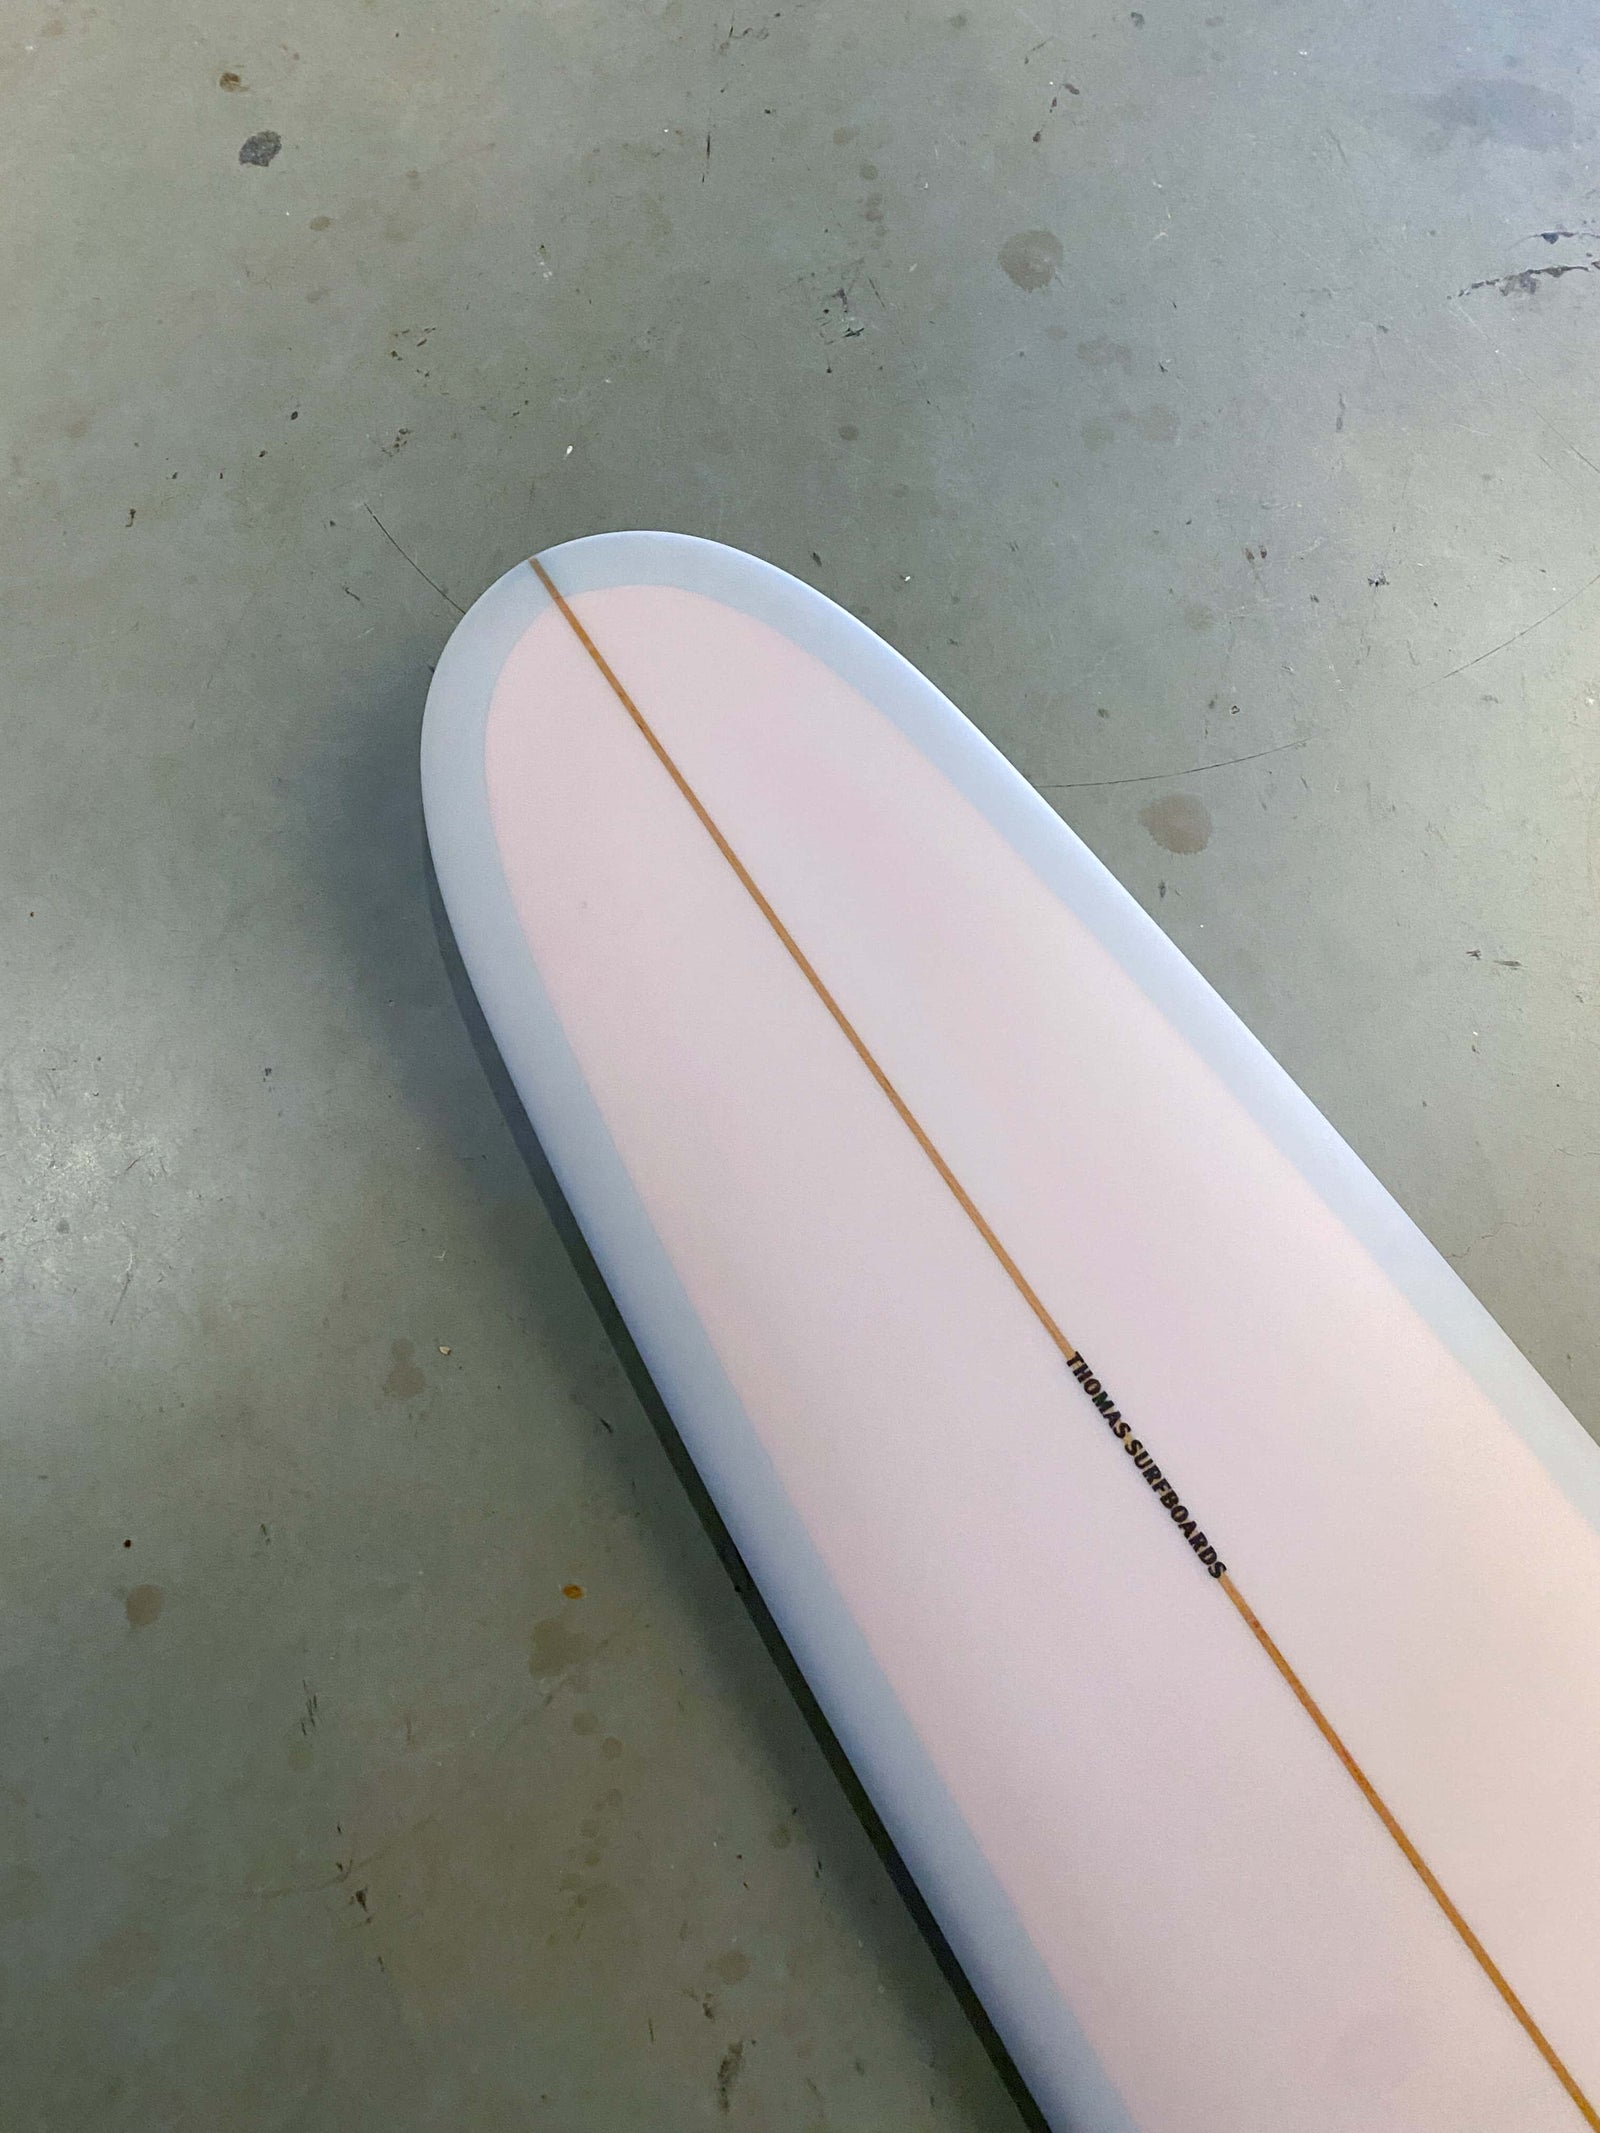 9'6" Scoop Tail #7869